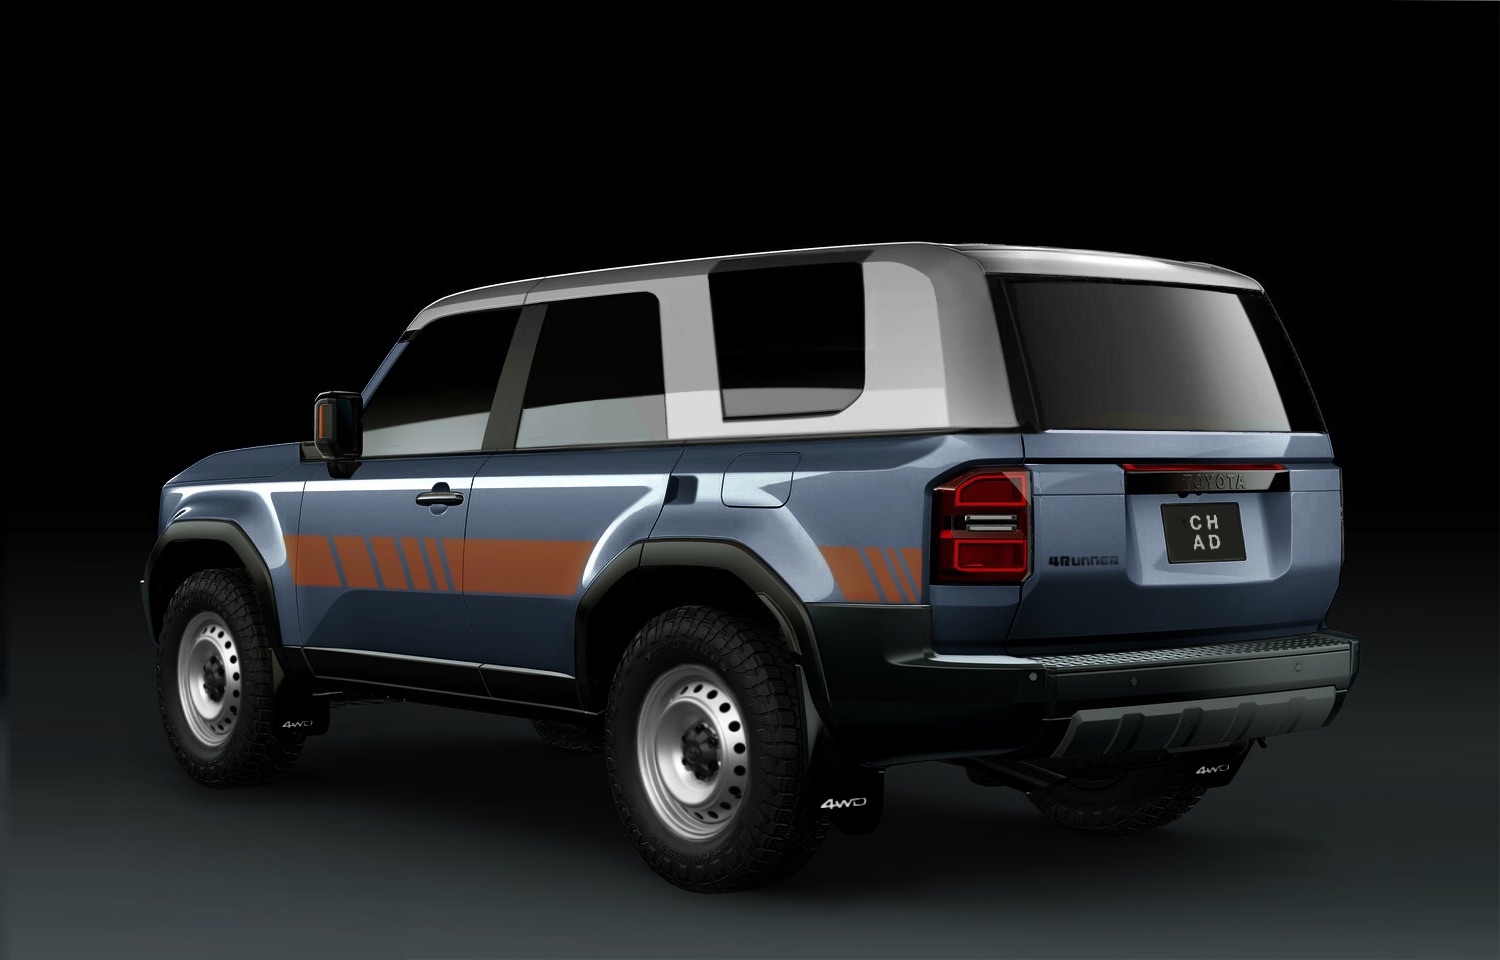 2025 Toyota 4runner Rendered: Topless 2025 4Runner based on the LC250. CDB62876-244B-4FA6-90F3-0596851C04A1